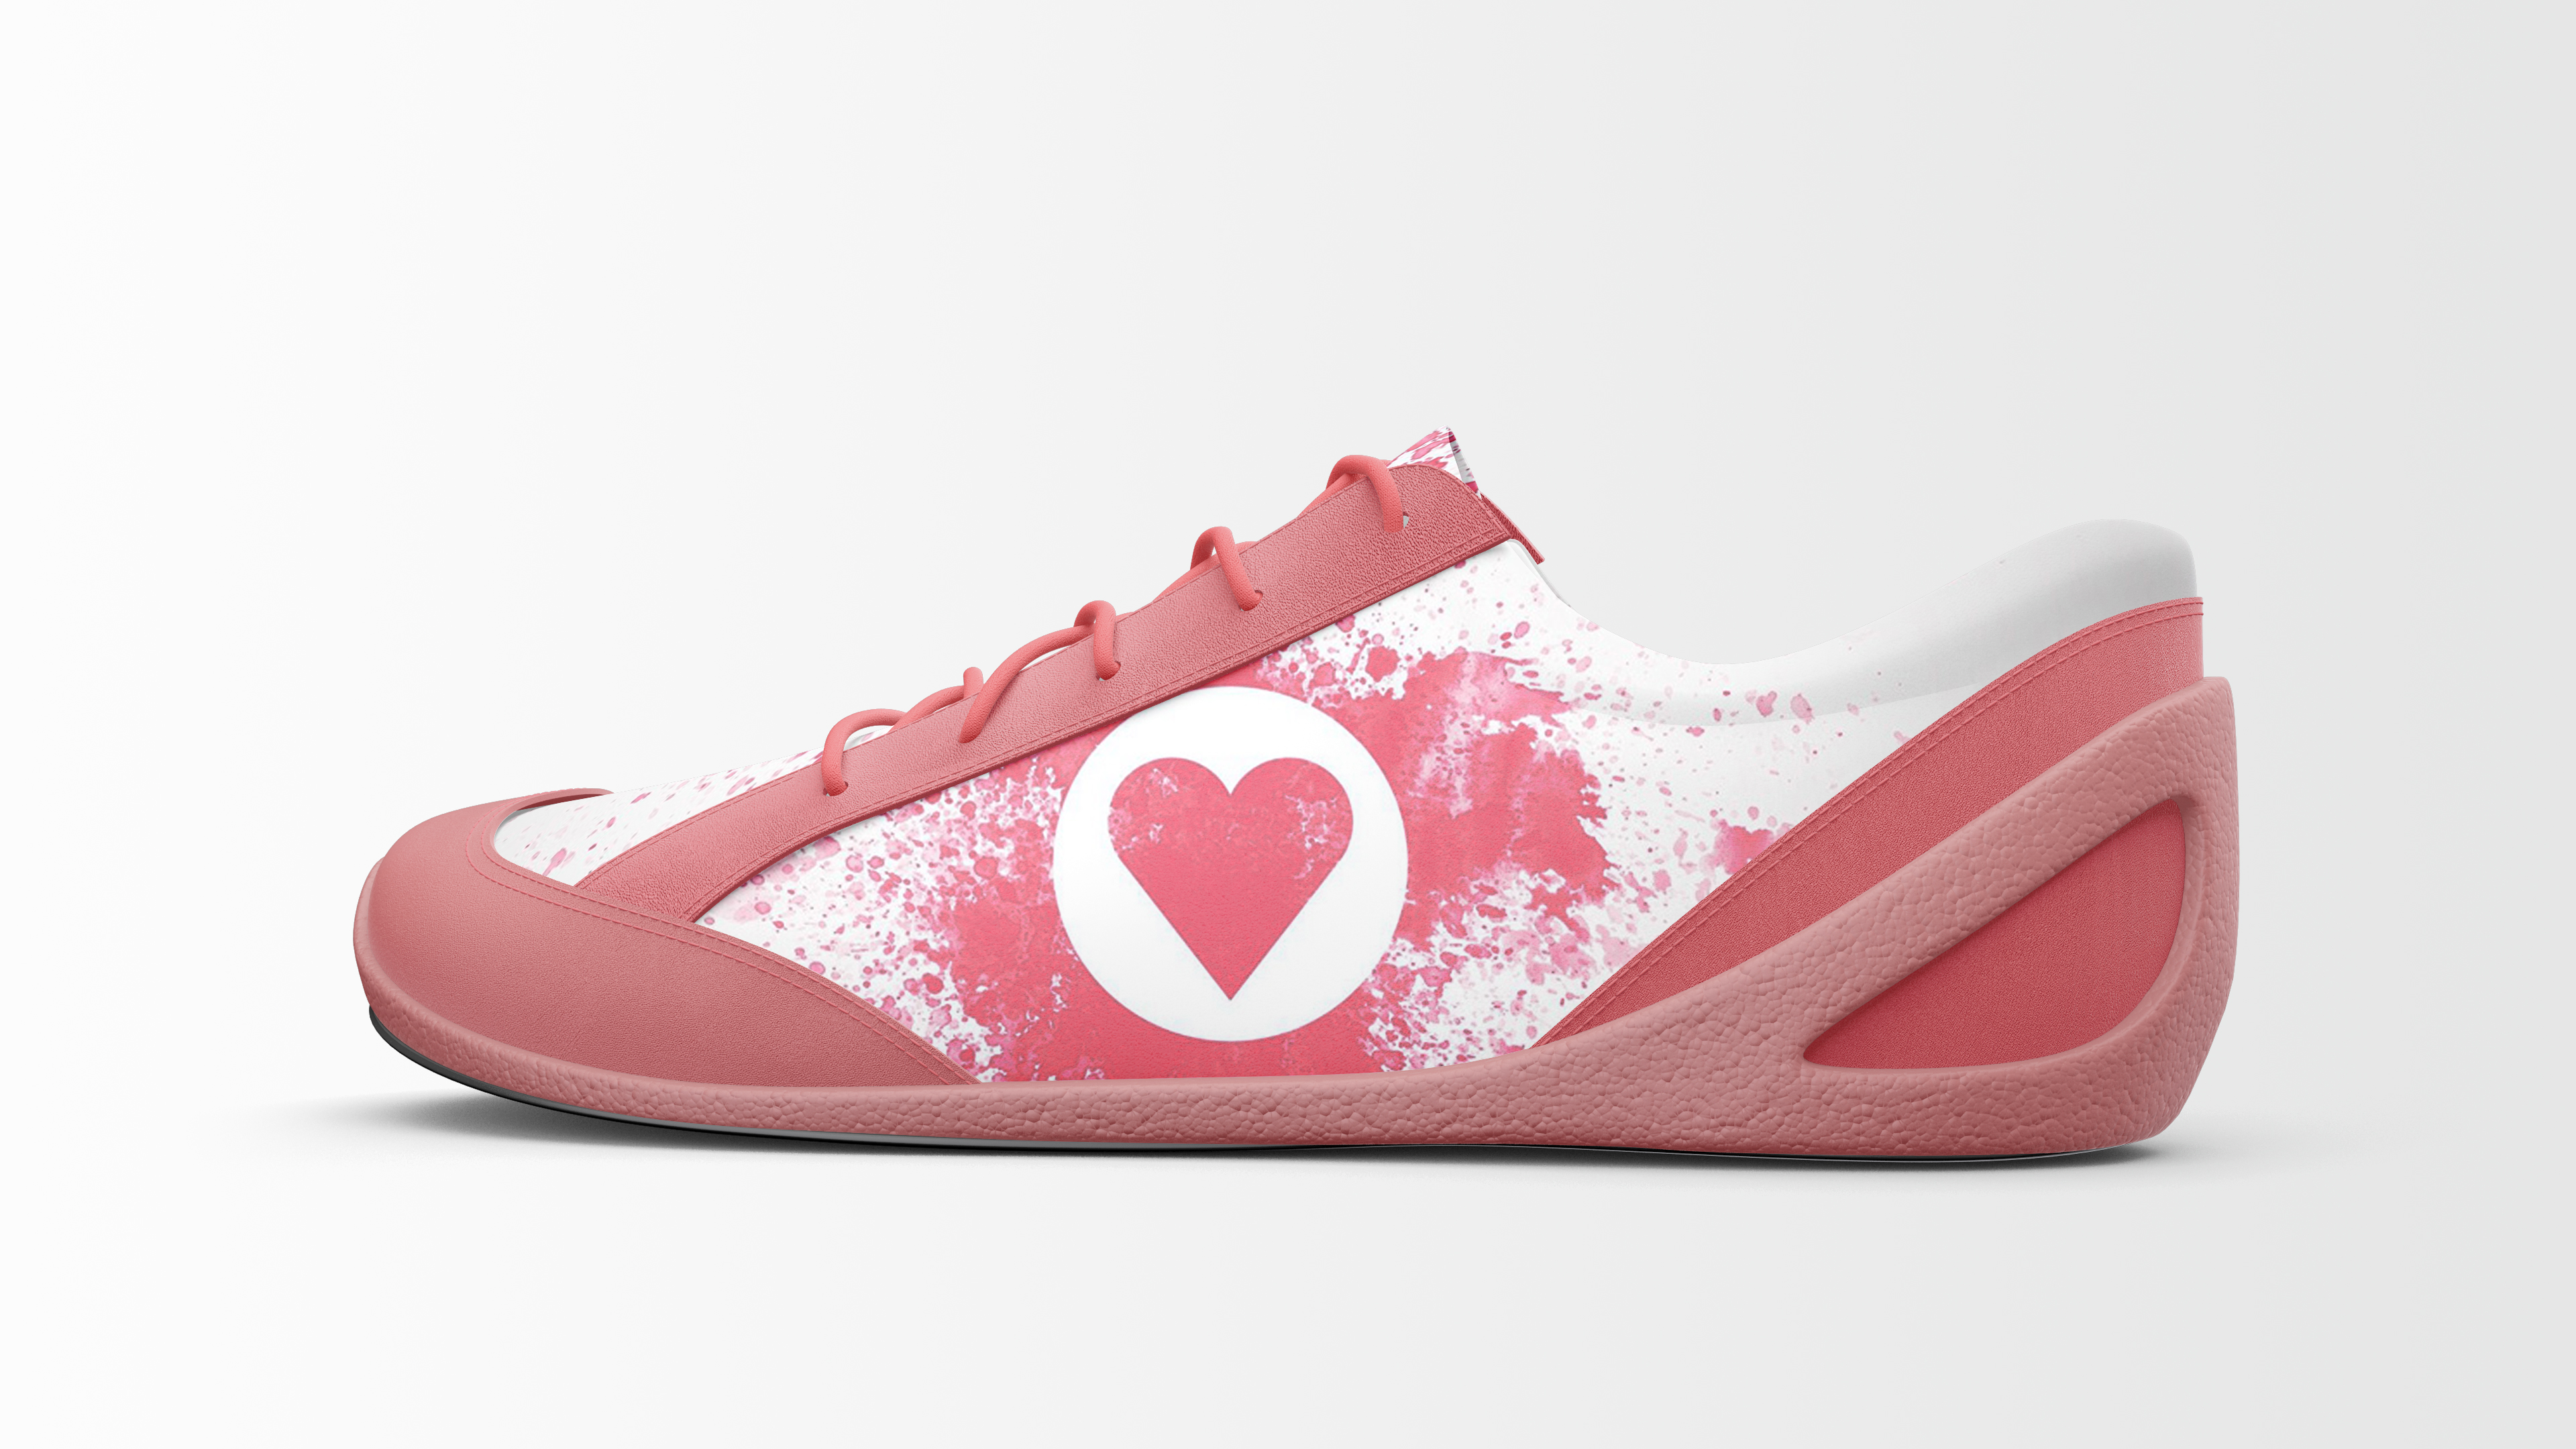 Download Shoes Mockup - Sneakers Shoes Mockup ~ Product Mockups on Creative Market